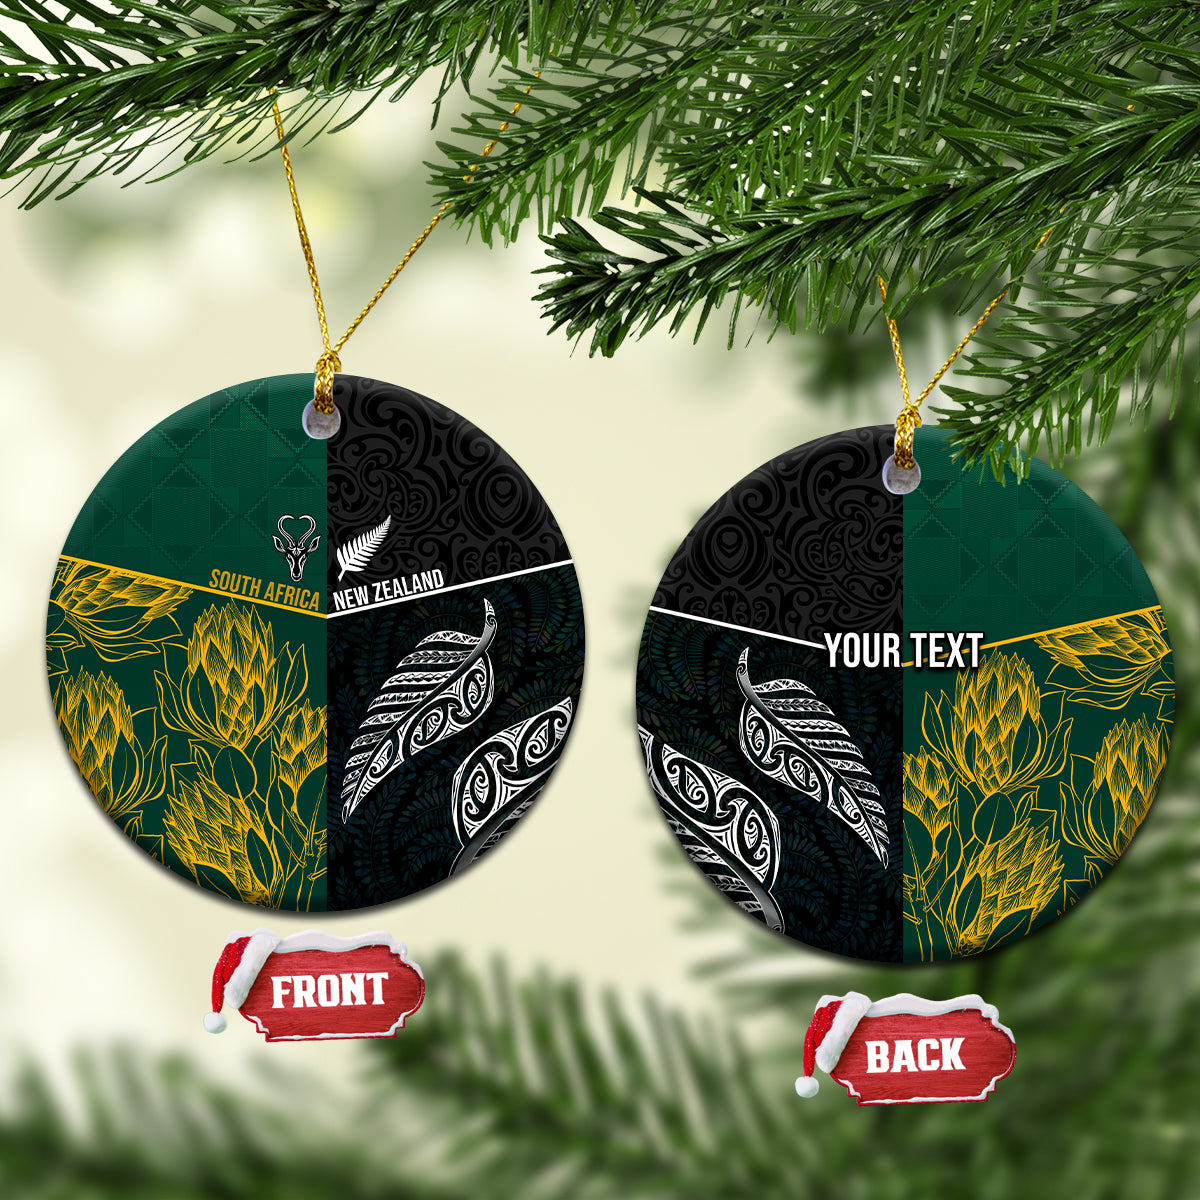 Personalised South Africa and New Zealand Ceramic Ornament King Protea and Silver Fern Mix Culture Pattern LT03 Circle Black - Polynesian Pride